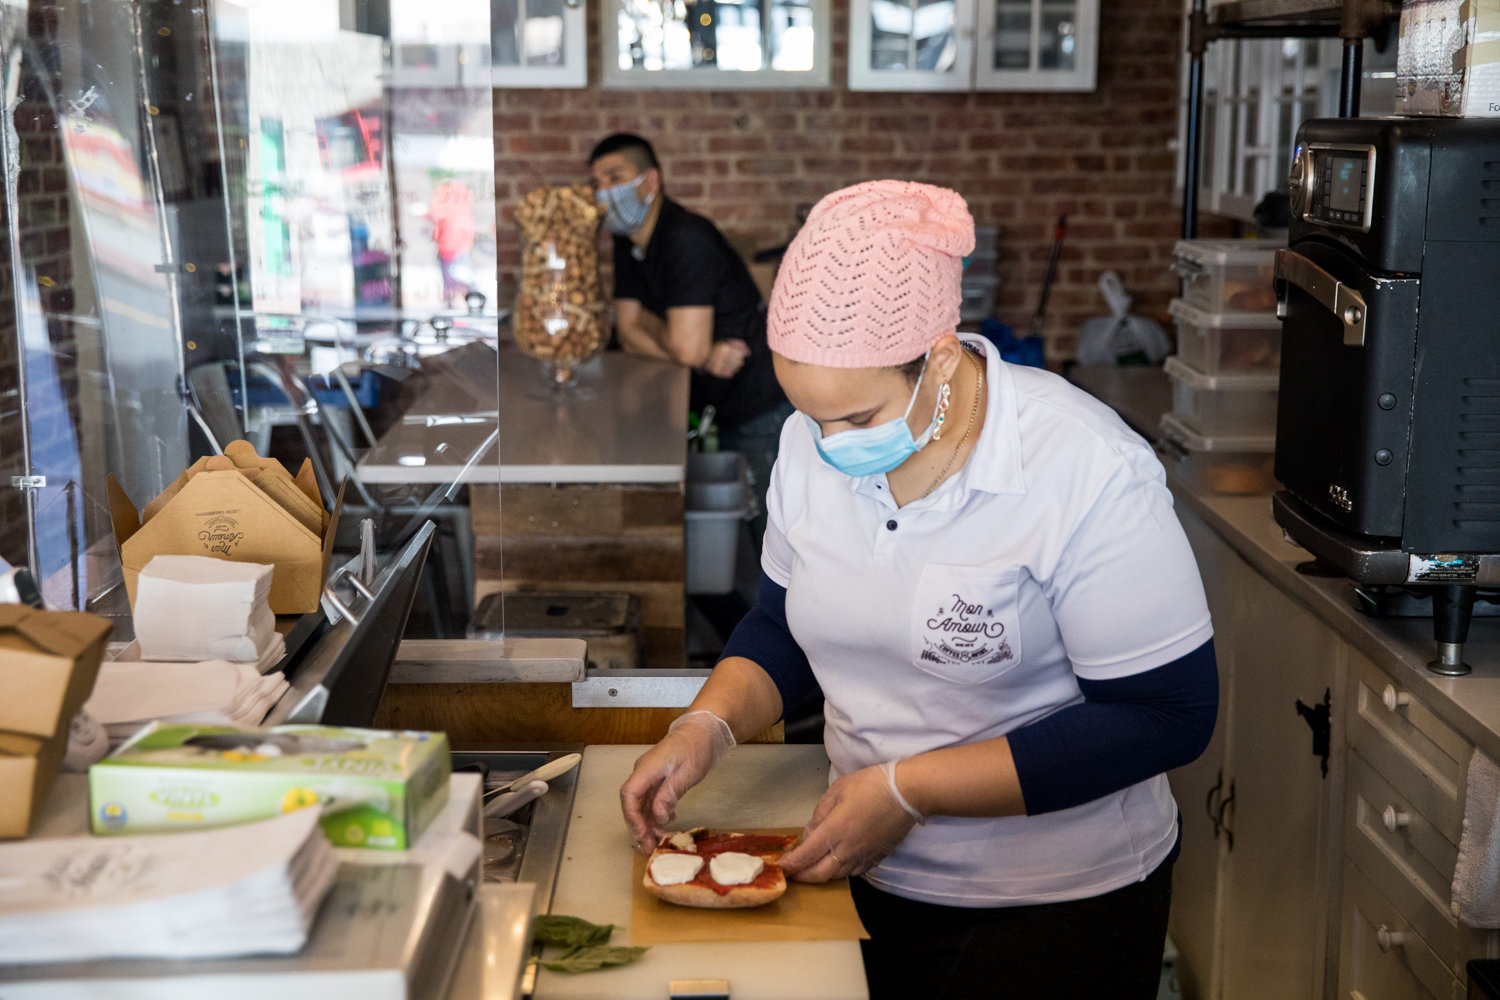 Yolanda Almonte prepares a sandwich inside Mon Amour Coffee & Wine, which was closed for nearly two months following the statewide shutdown as a result of the coronavirus pandemic.